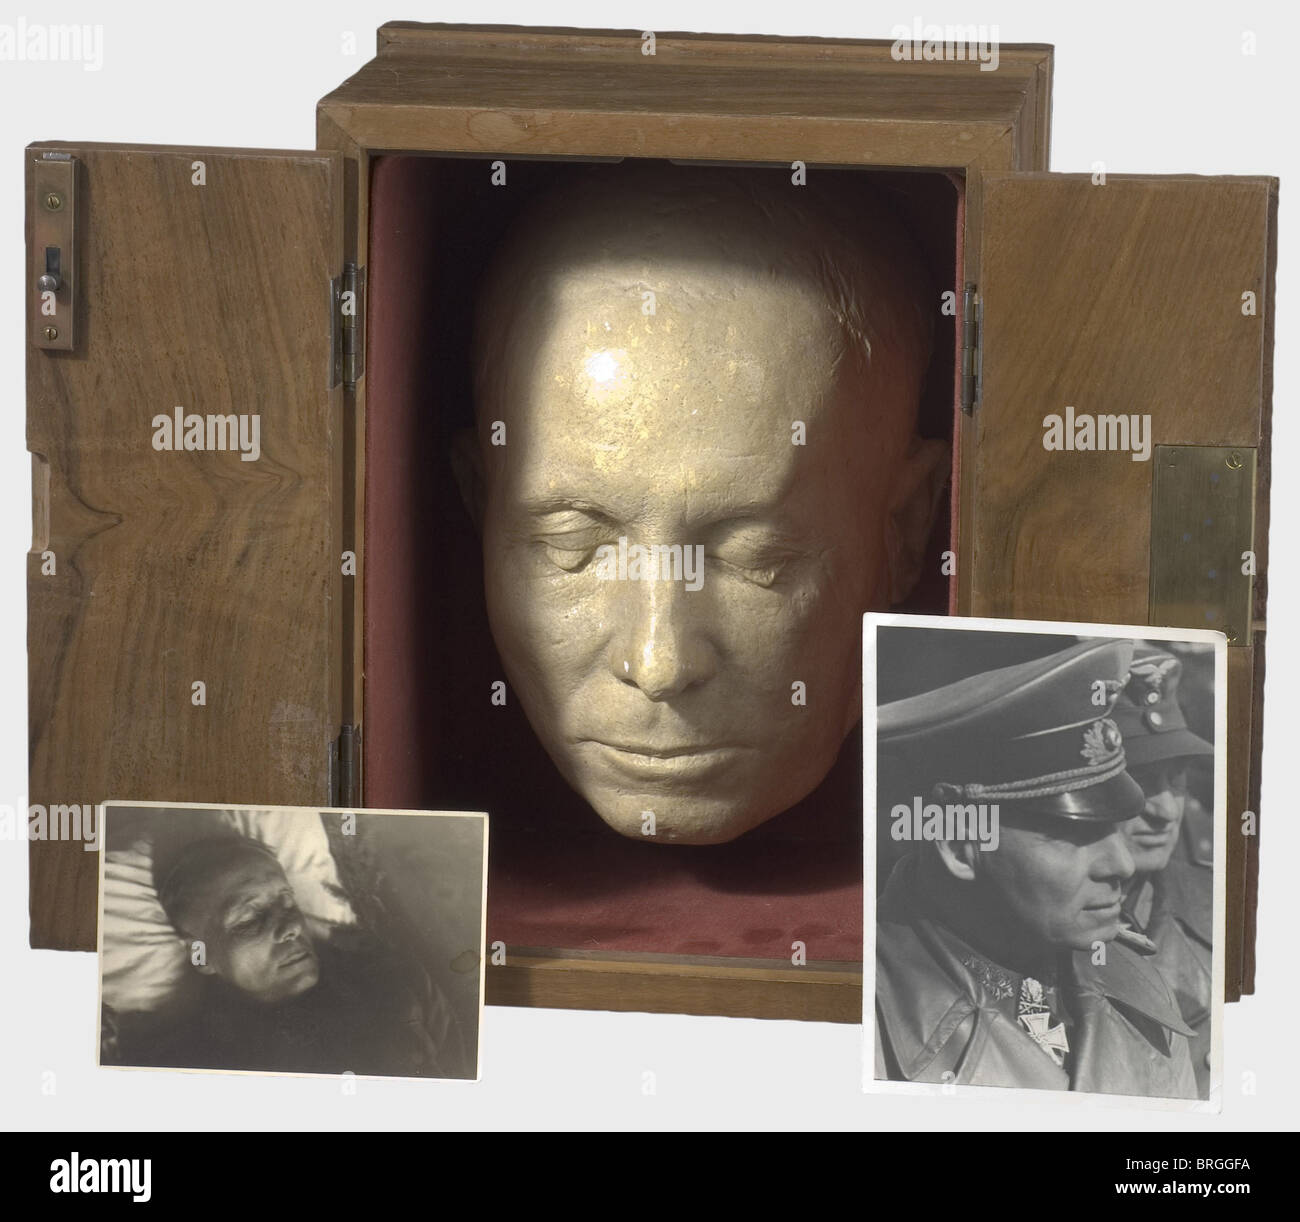 Field Marshal Erwin Rommel (1891 - 1944), death mask Plaster cast, very finely modelled, coated with protective lacquer, on verso incorporated wire for hanging. In custom-made wood shrine with openable doors and velvet lining. From the estate of a former fellow officer of Rommel, who served with the 'Desert Fox' in WW I and commissio people, 1930s, 20th century, Africa, African, corps, branch of service, branches of service, armed service, object, objects, clipping, cut out, cut-out, cut-outs, military, militaria, mask, masks, mask, masks, man, men, male, Stock Photo